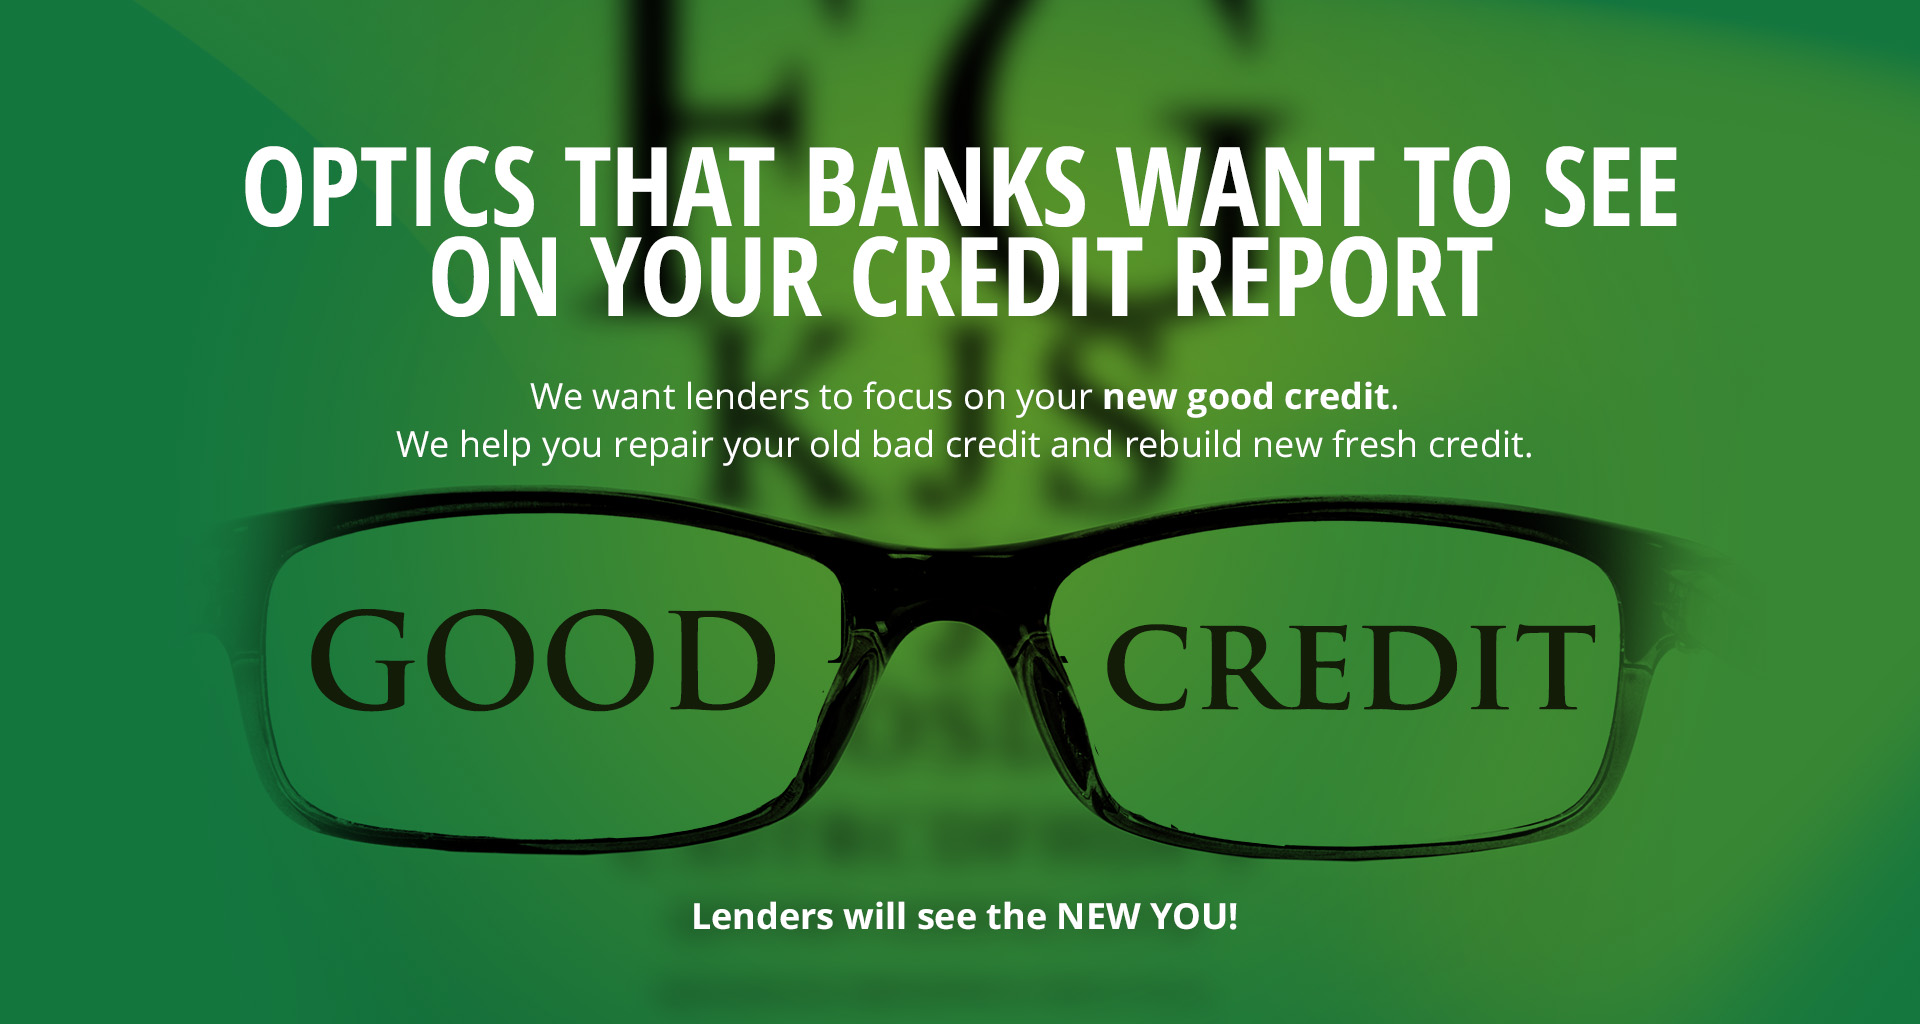 Optics that banks want to see on your credit report